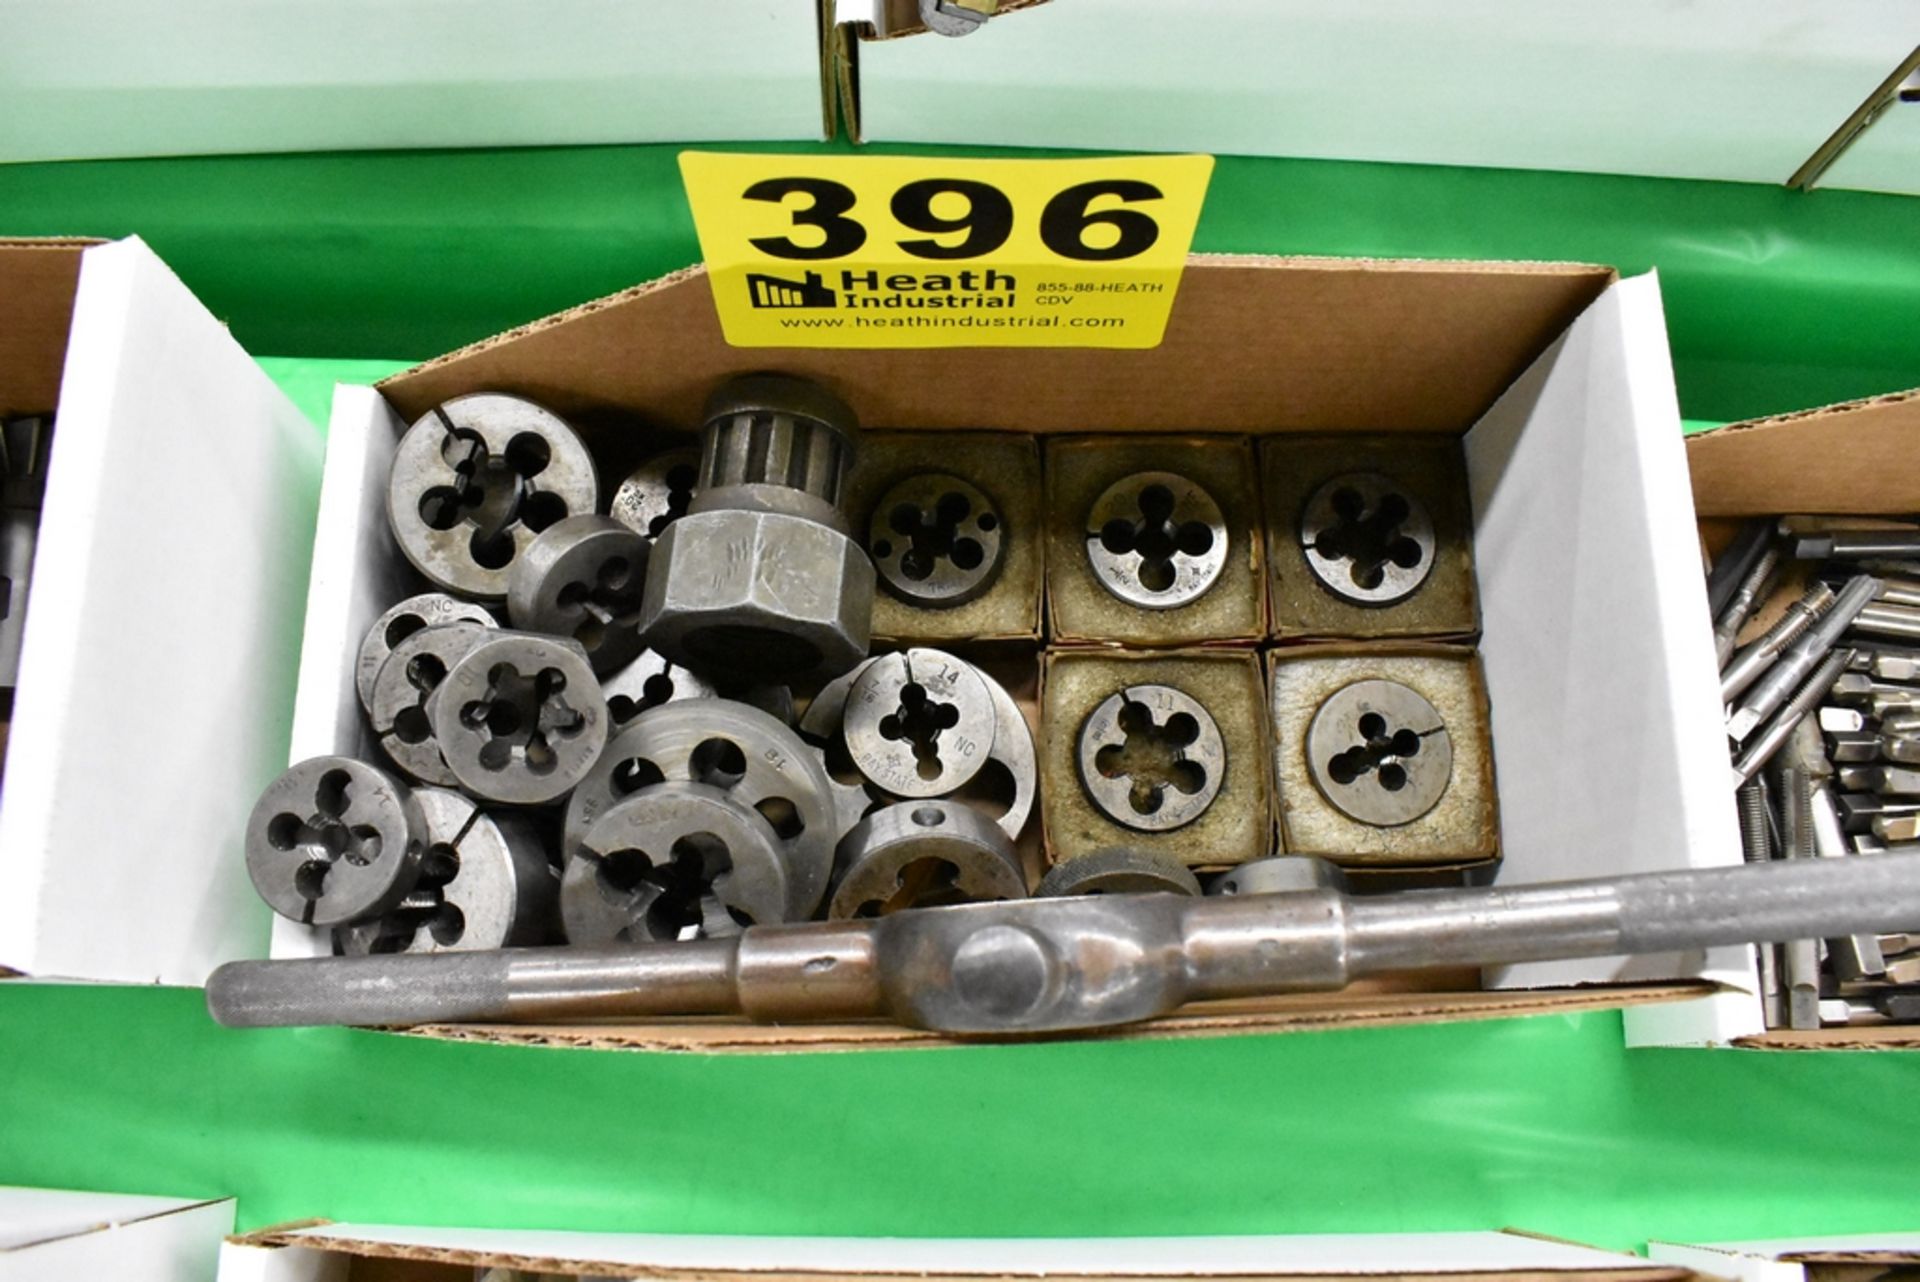 DIE STOCK WITH ASSORTED THREADING DIES IN BOX